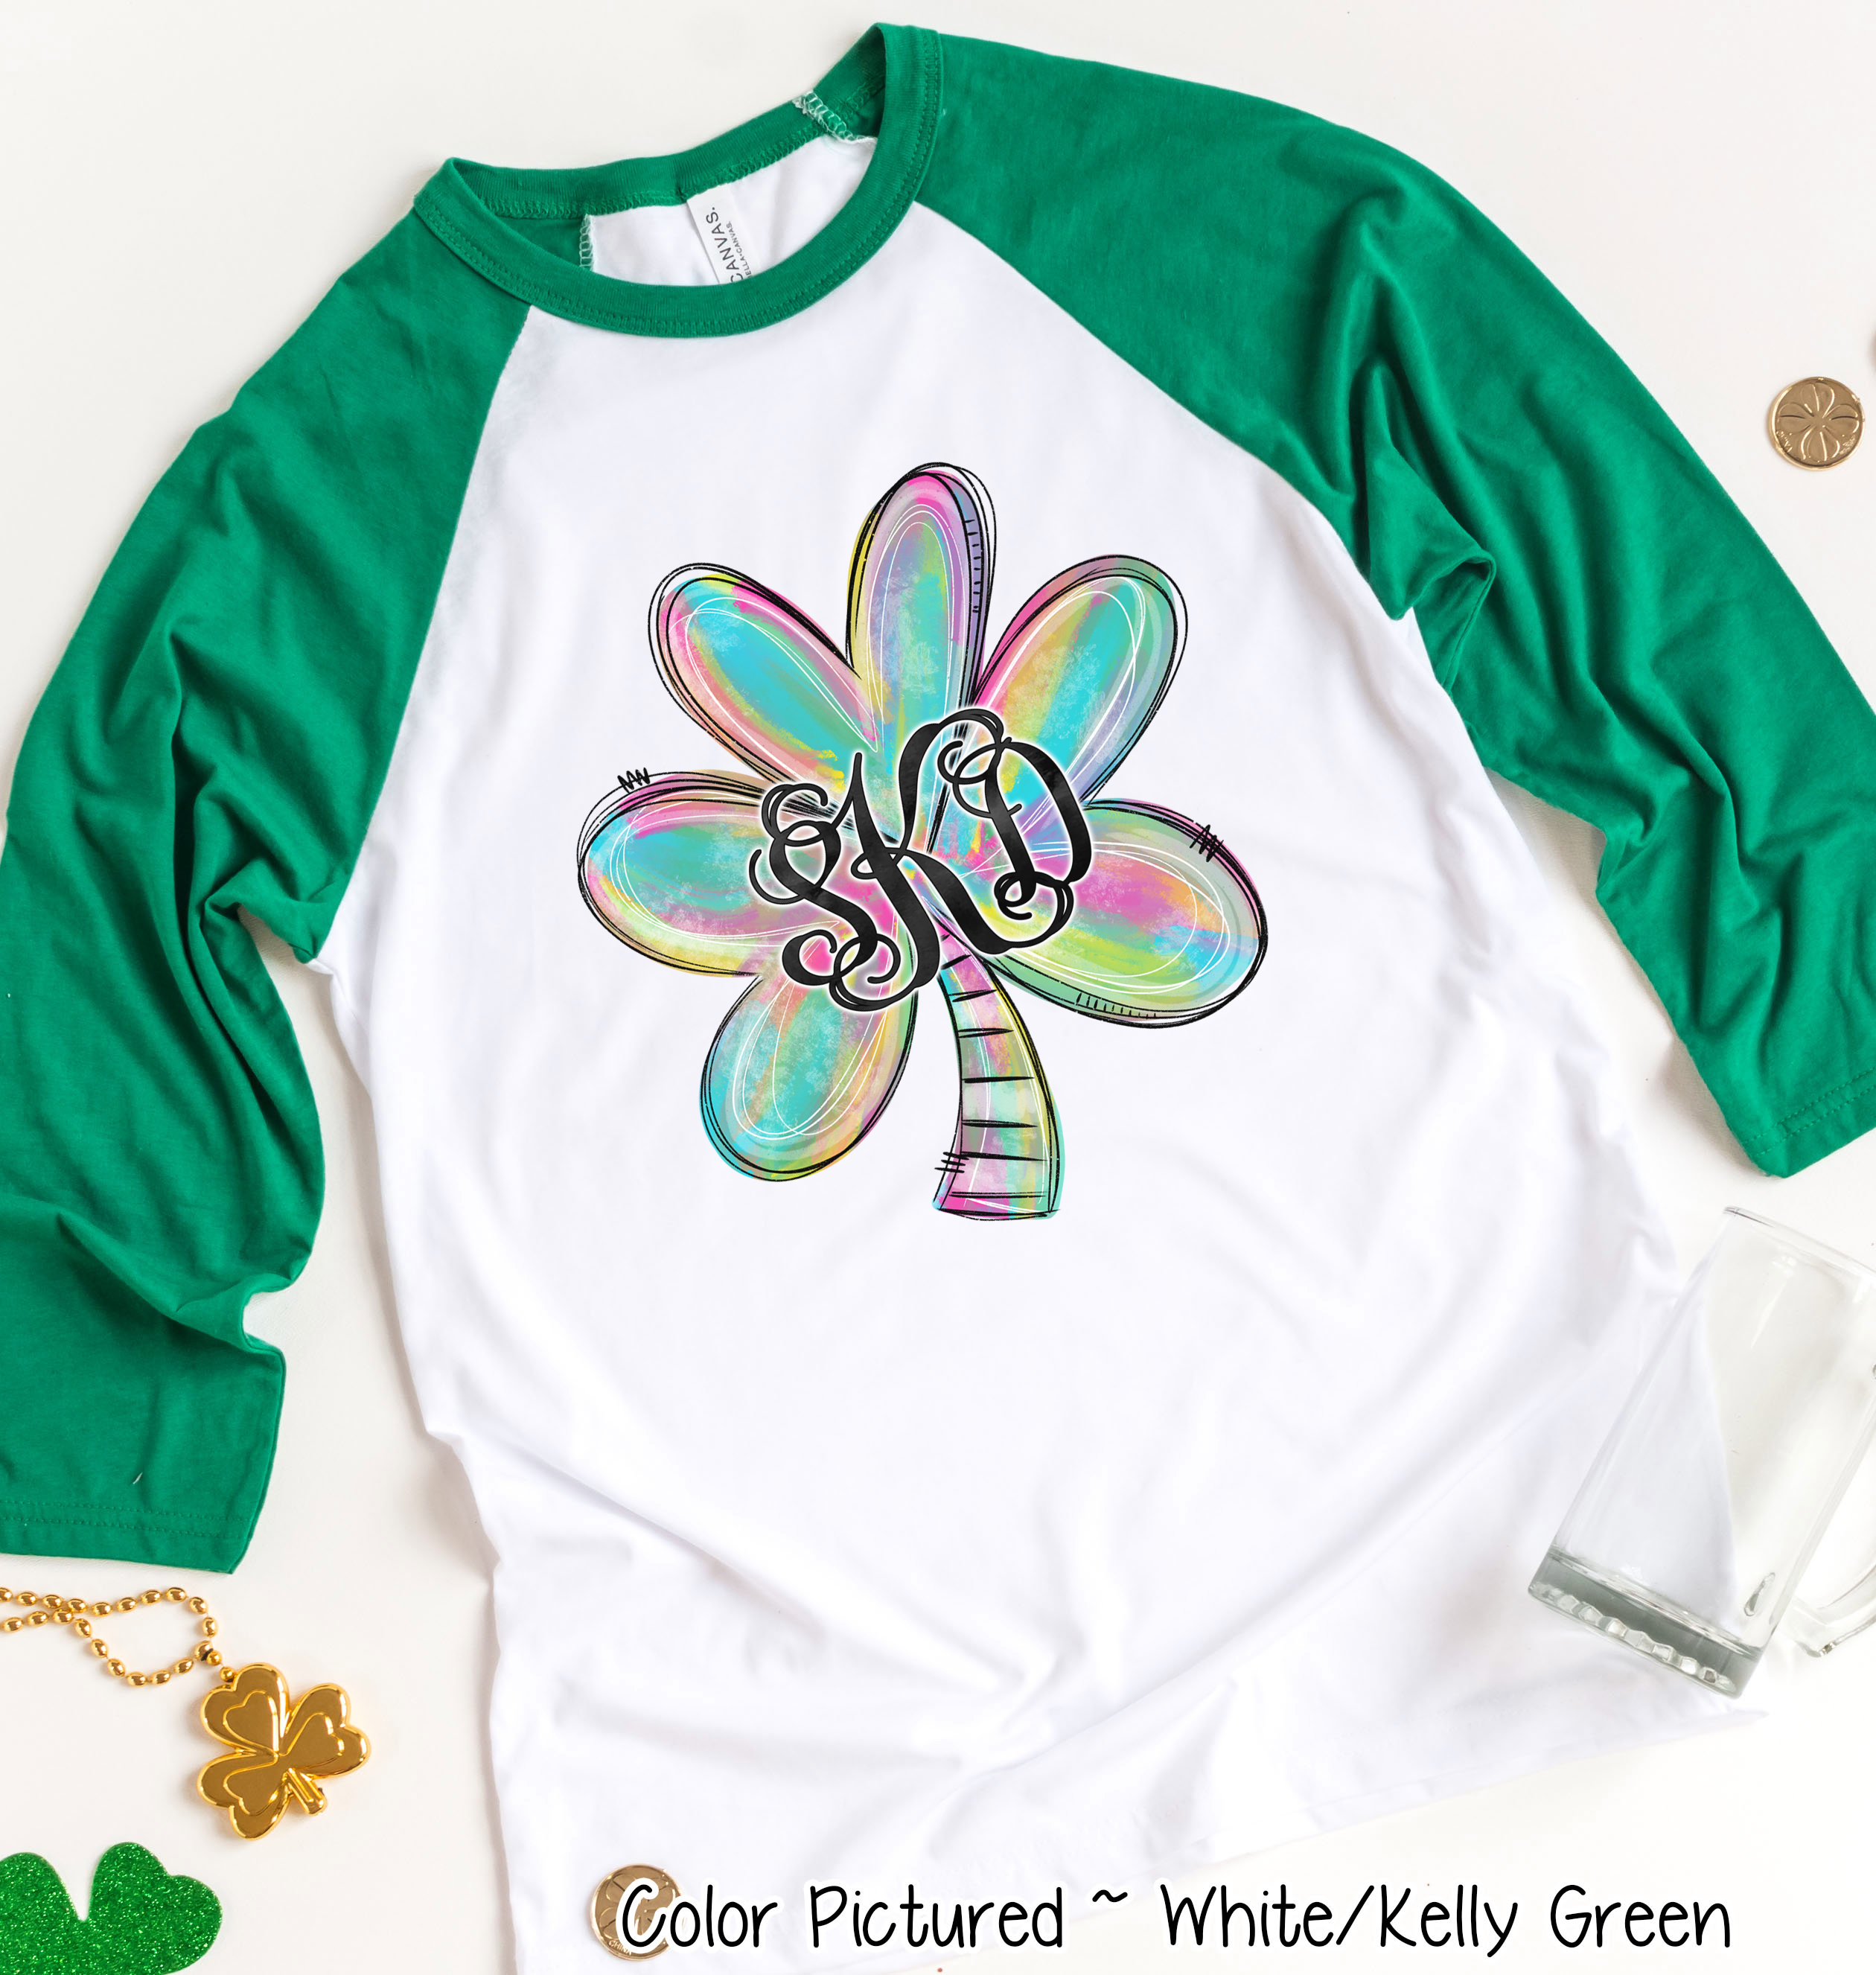 Monogram Colorful Watercolor Shamrock St Partricks Day Tee